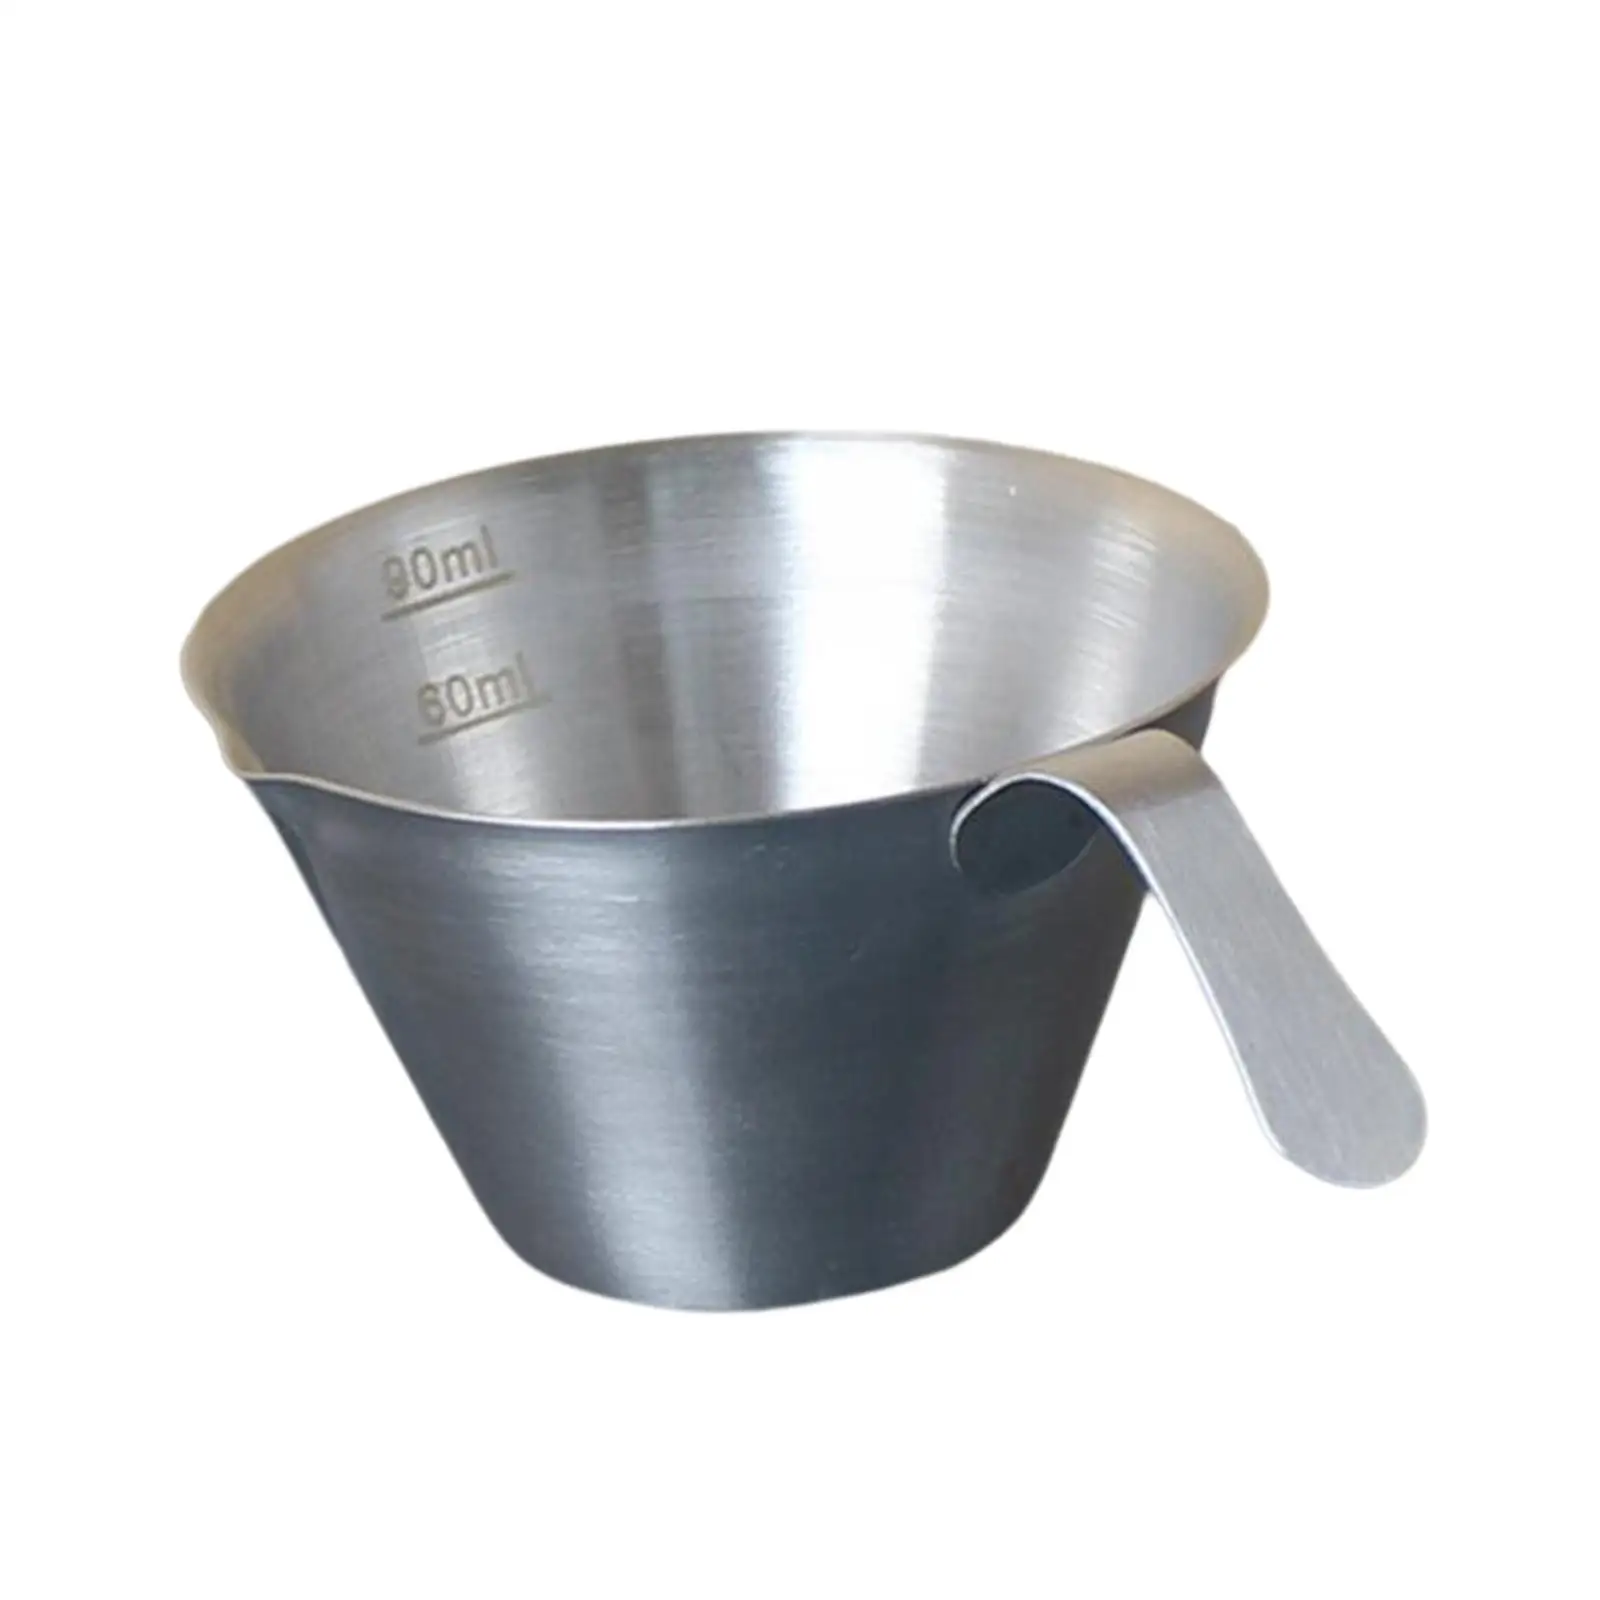 Stainless Steel Espresso Measuring Cup with Scale Coffee Mug Bar Drink Mugs for Party